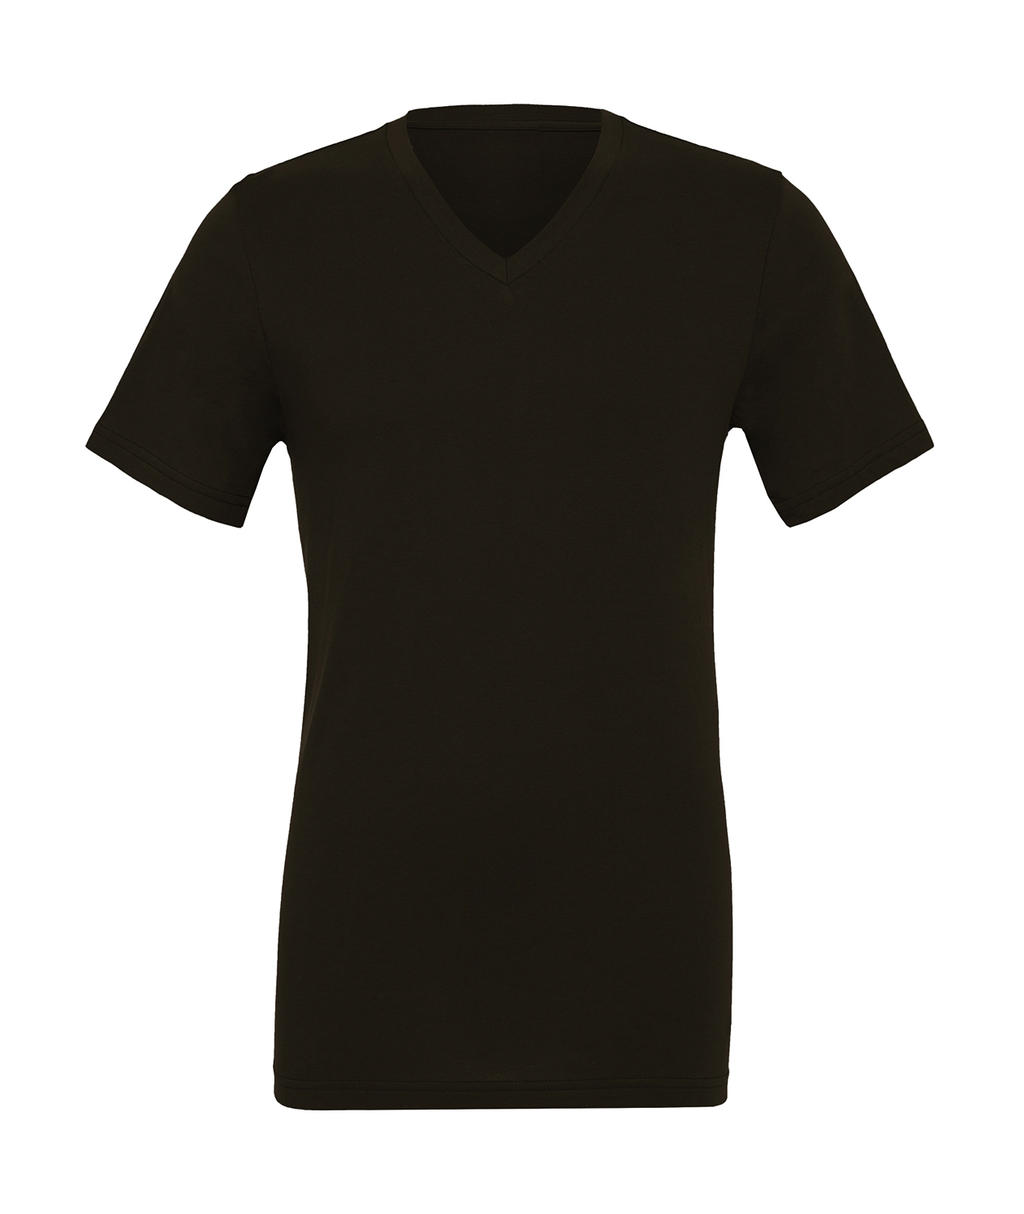  Unisex Jersey V-Neck T-Shirt in Farbe Brown